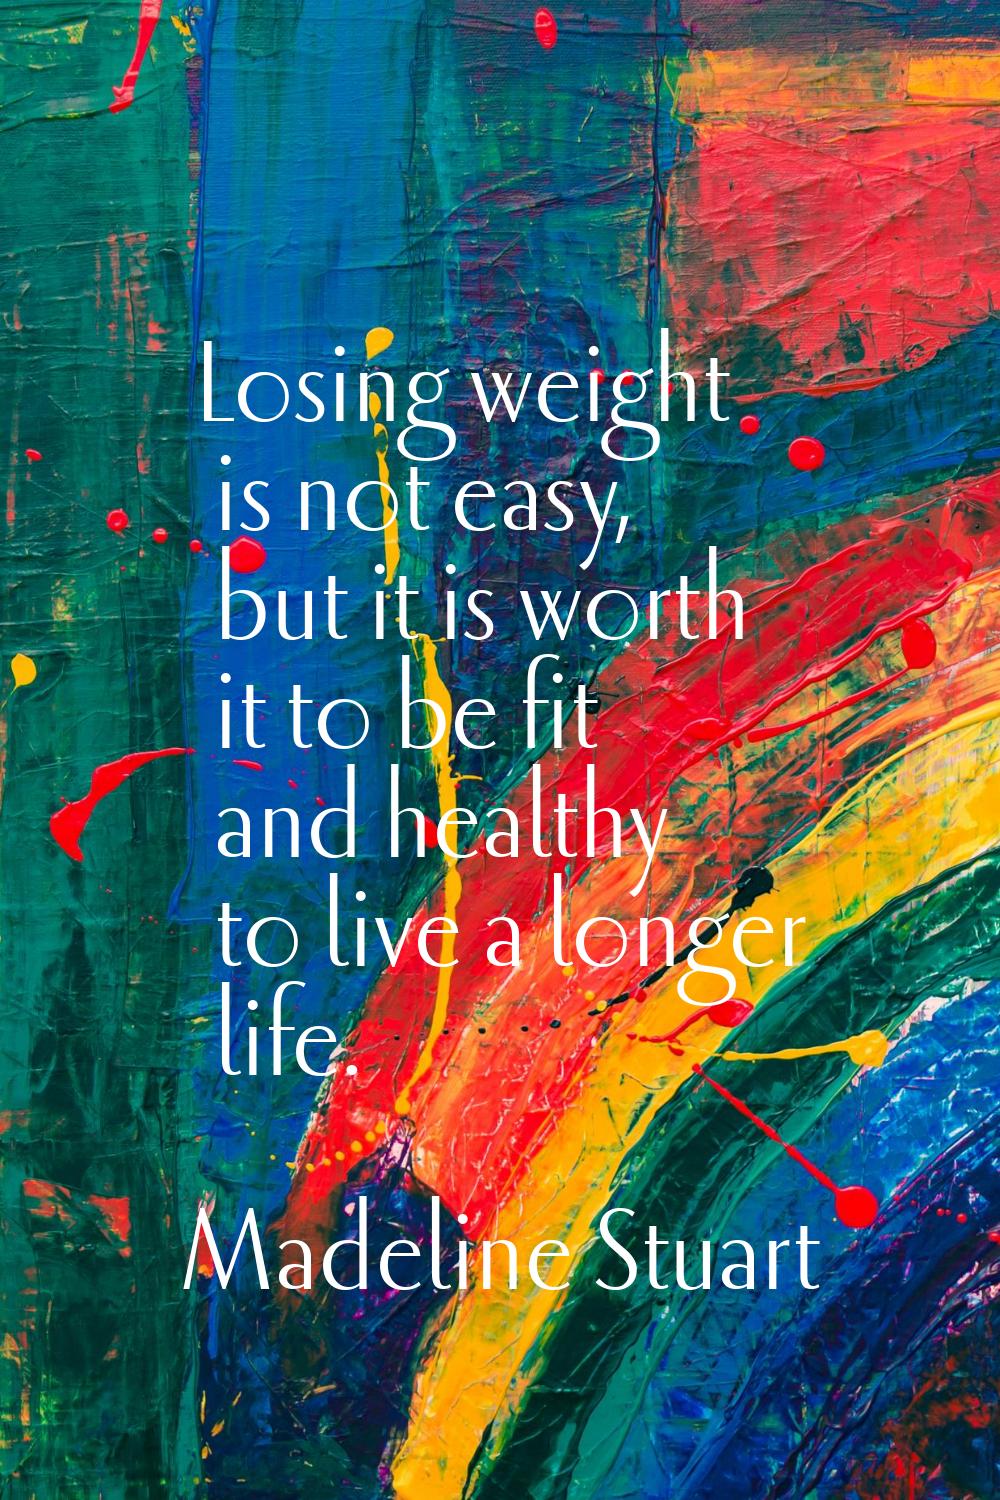 Losing weight is not easy, but it is worth it to be fit and healthy to live a longer life.